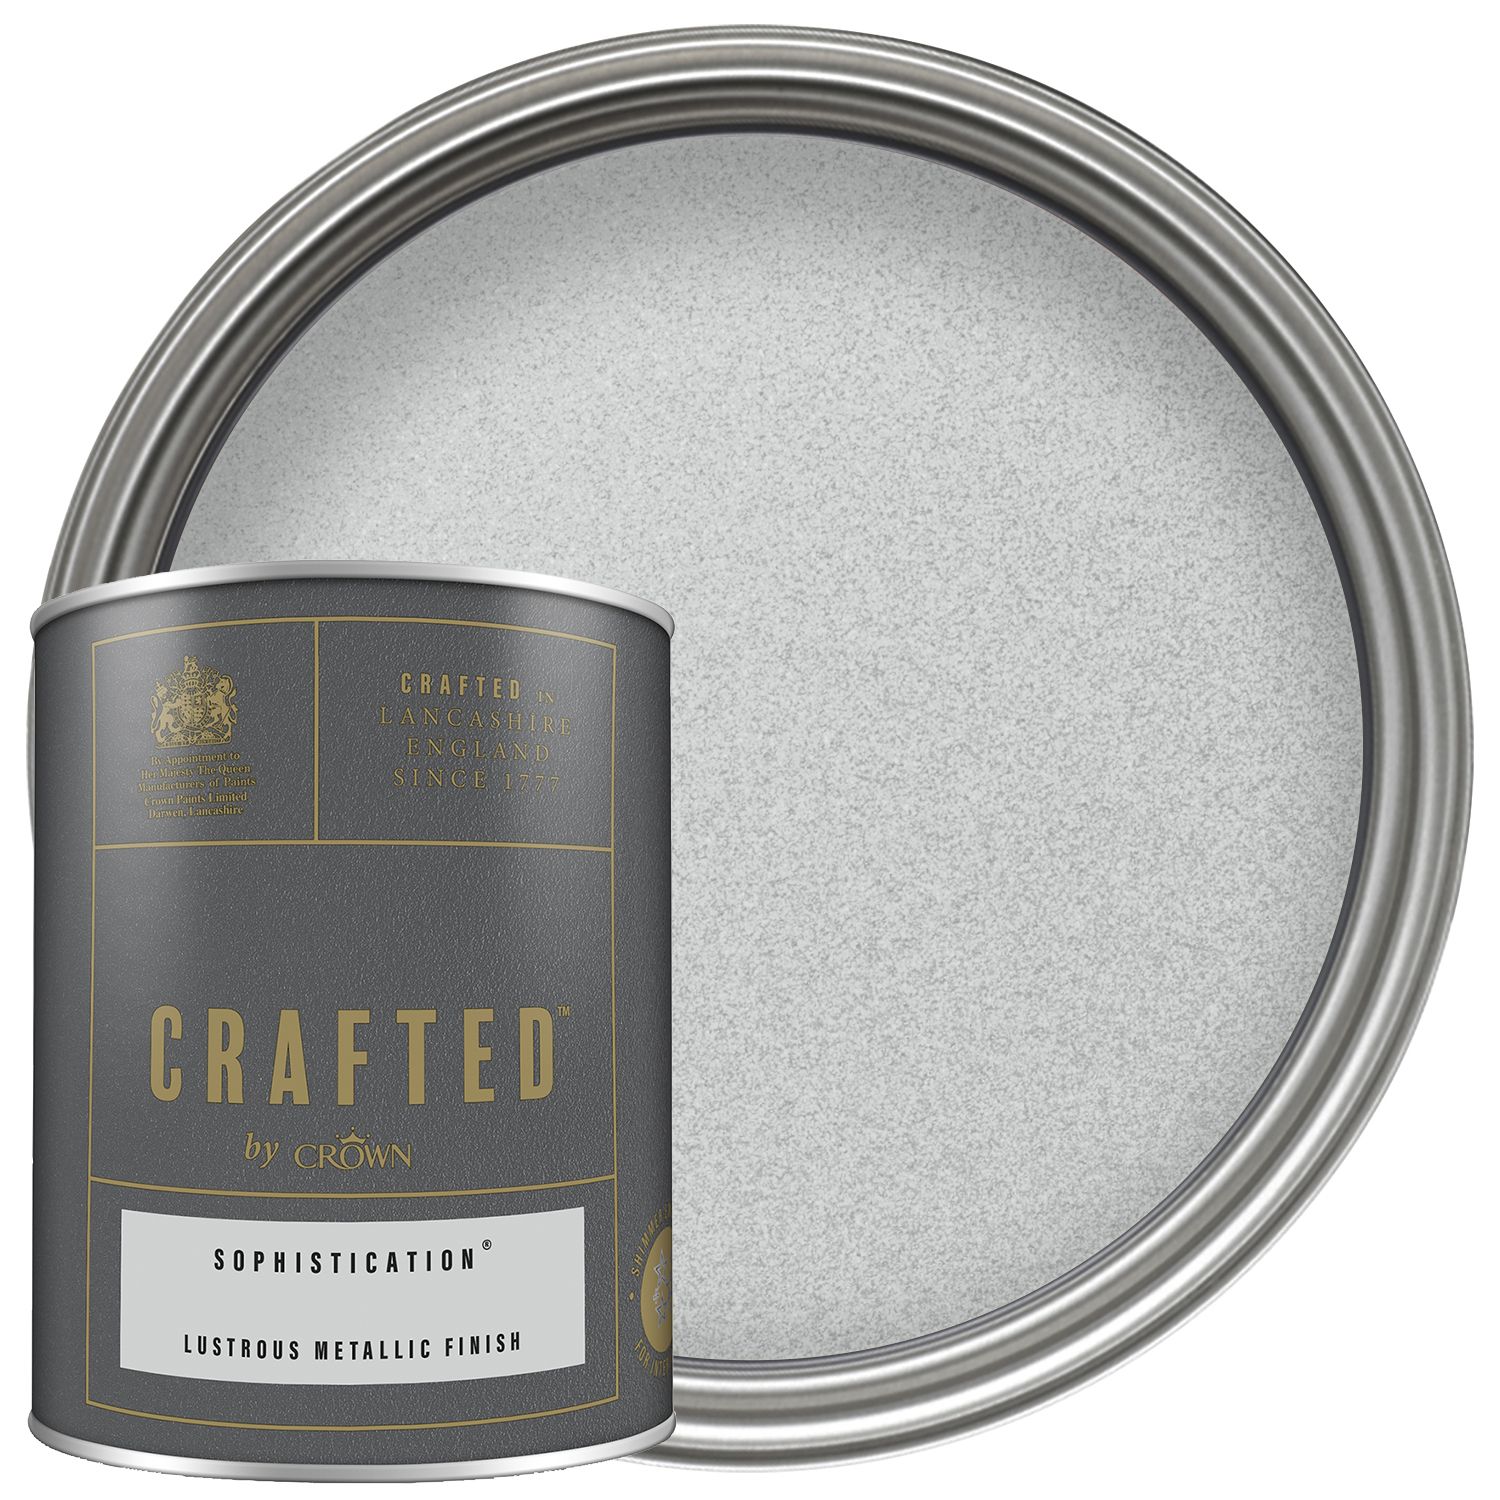 CRAFTED™ by Crown Emulsion Interior Paint - Metallic Sophistication - 1.25L